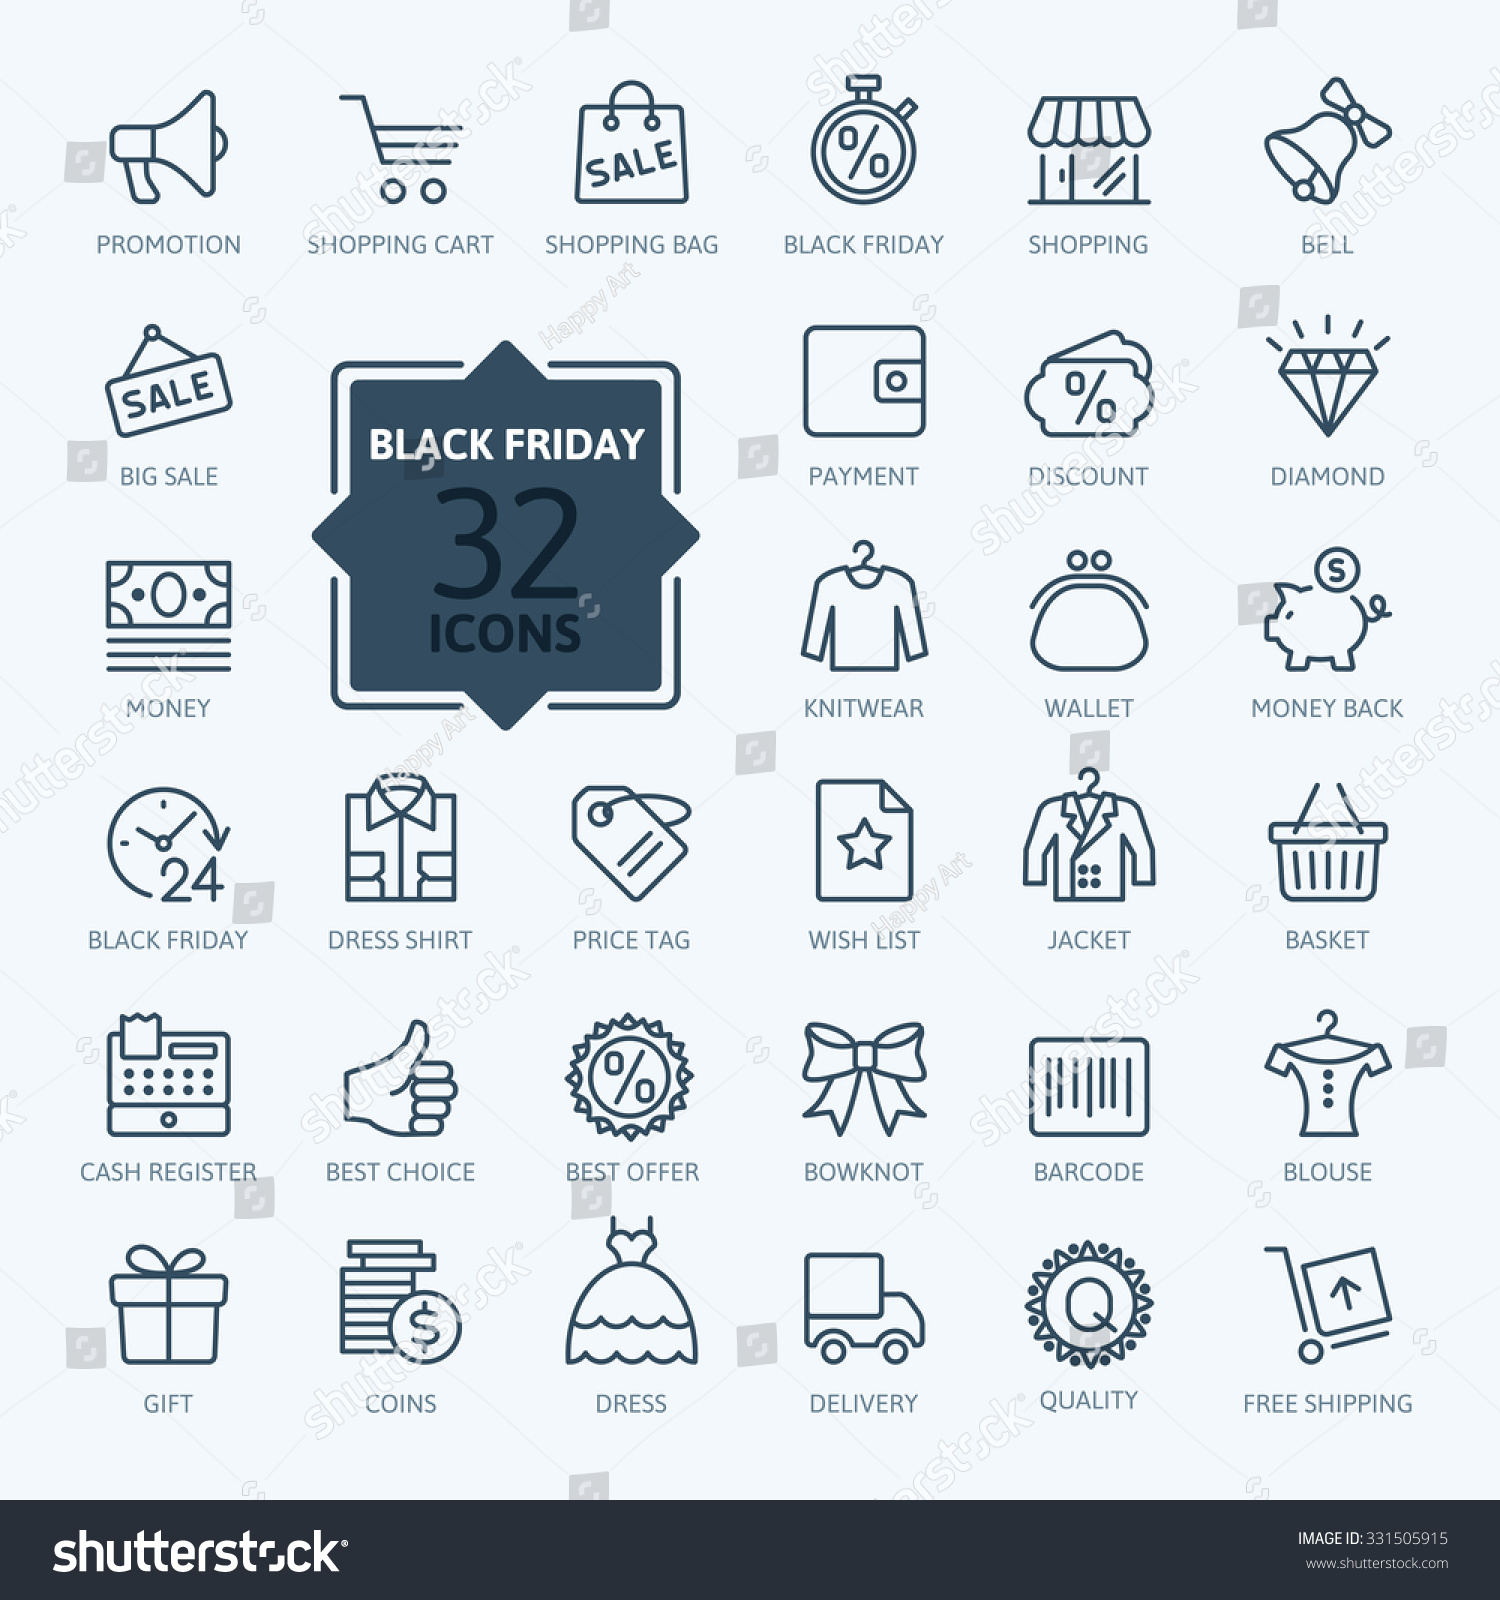 Outline icon collection - Black Friday Big Sale #331505915